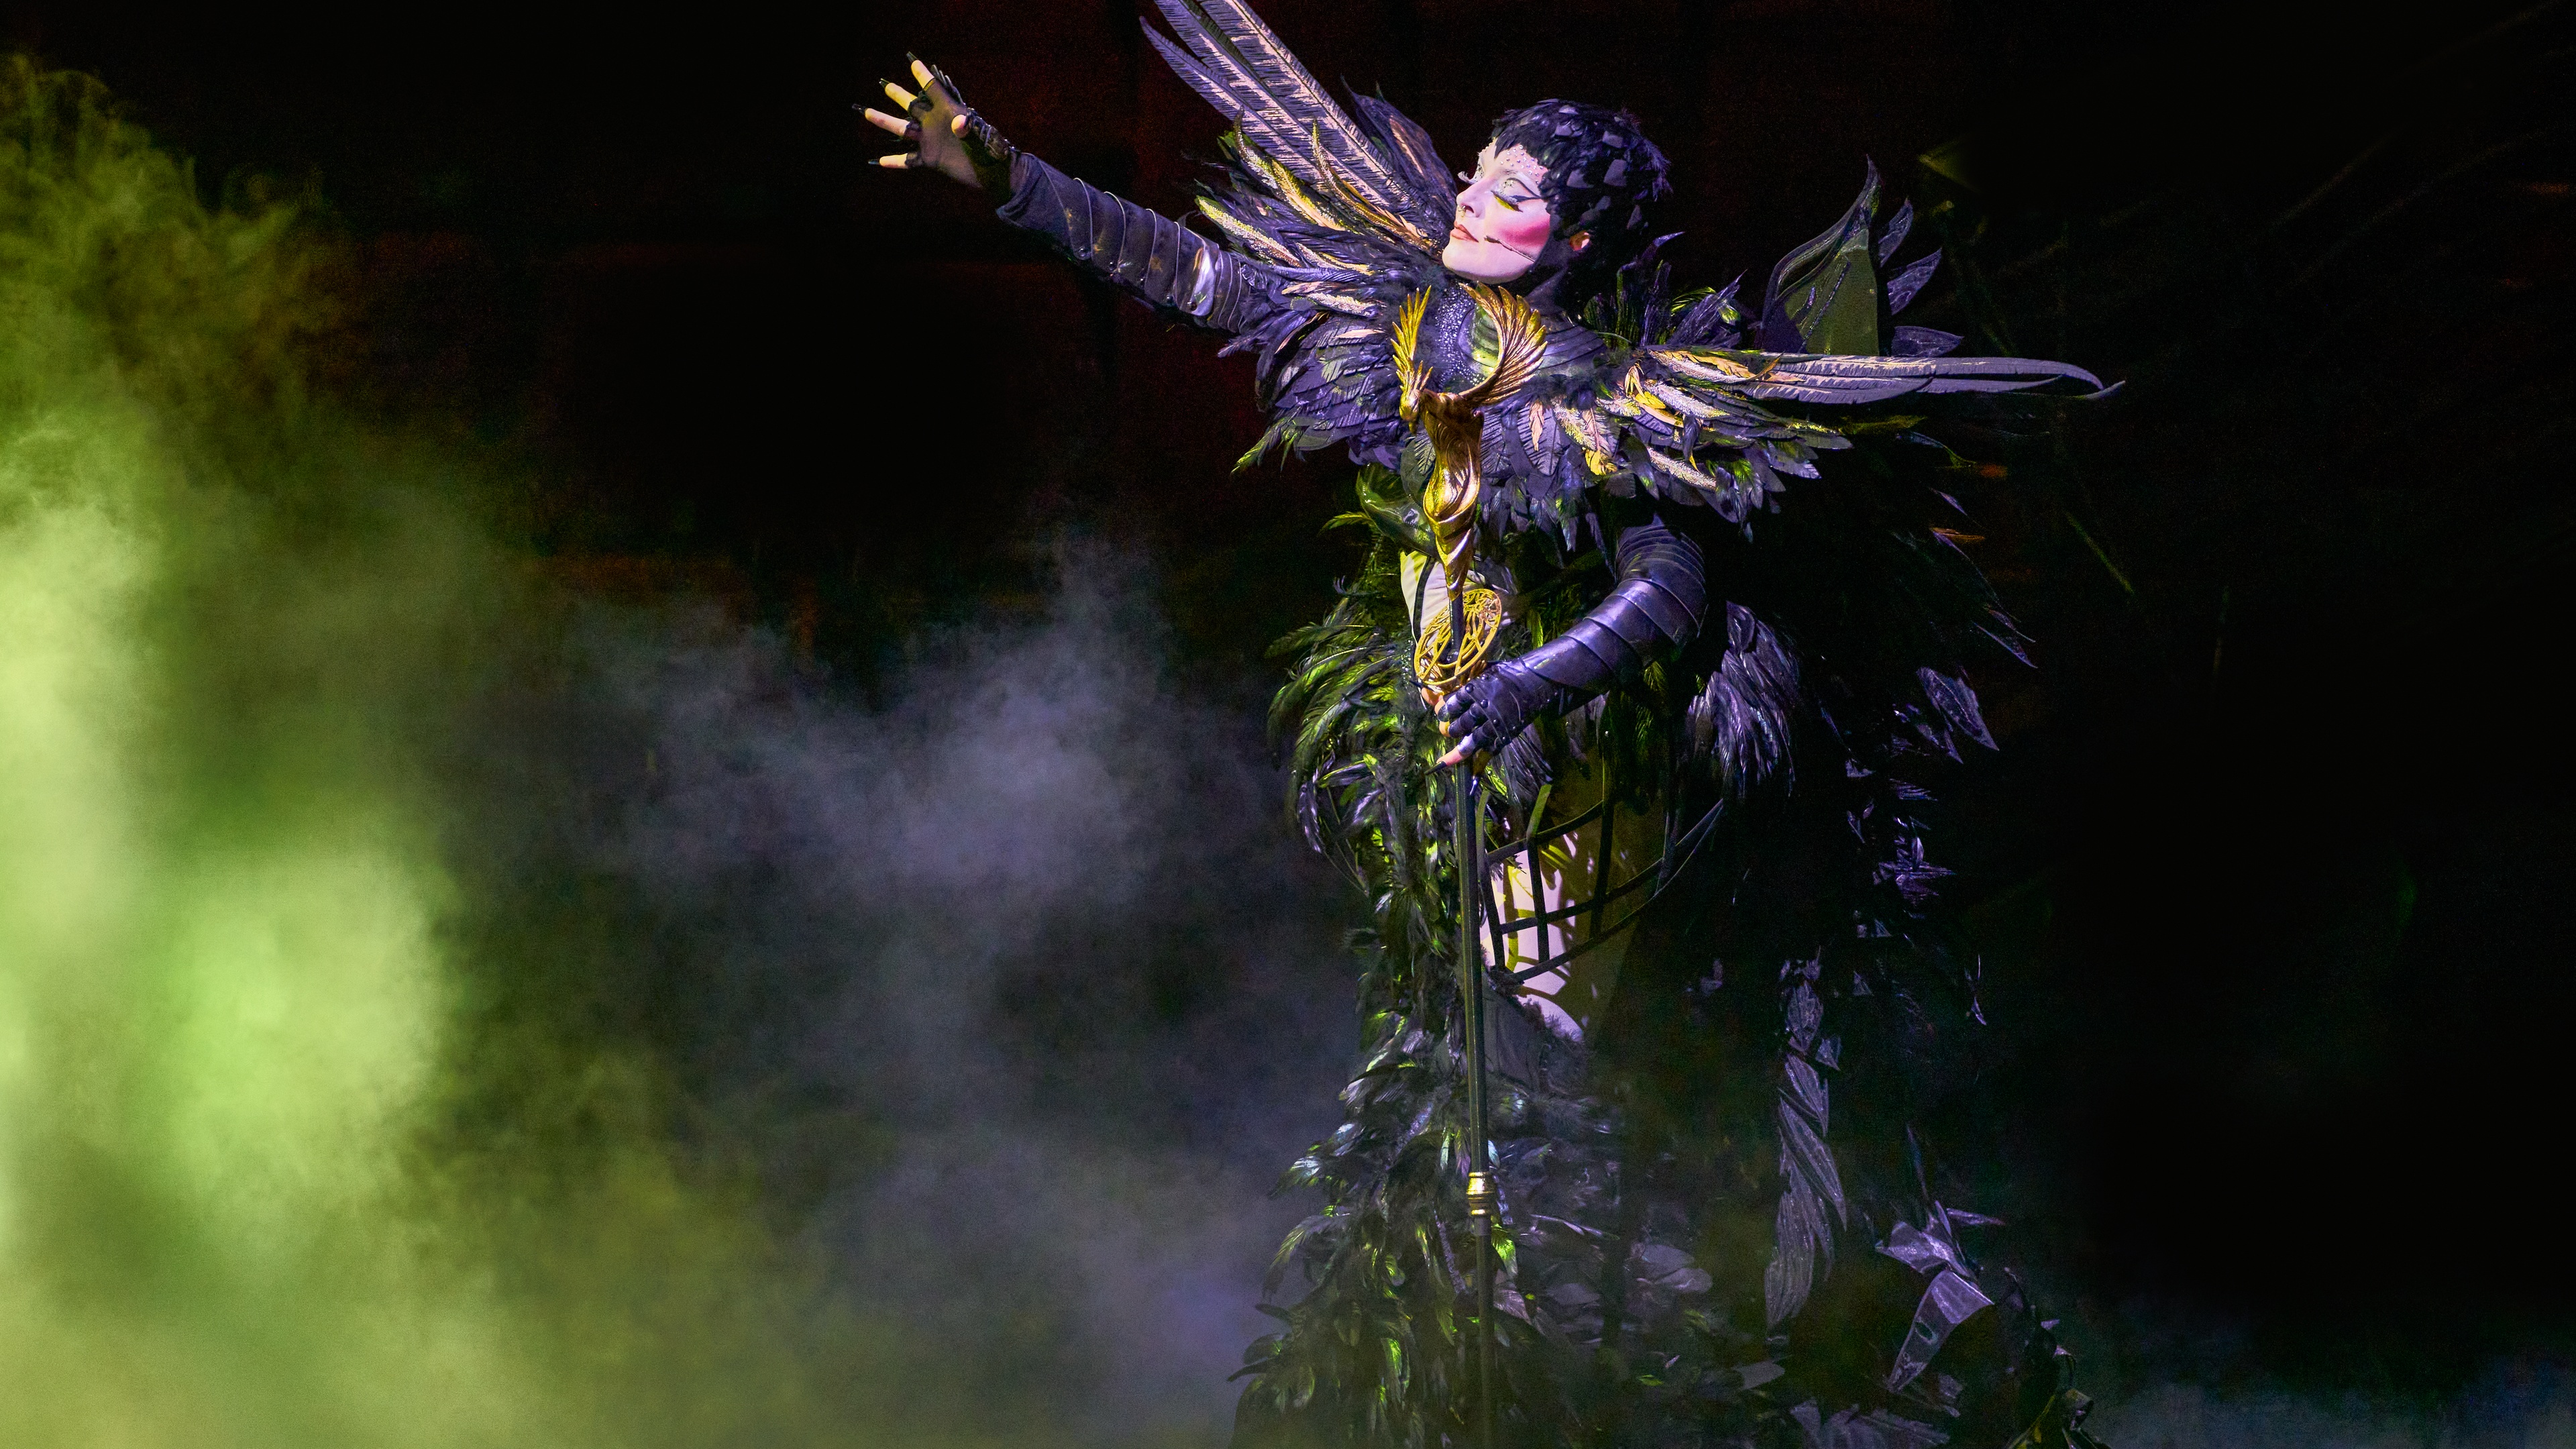 Awakening performer in black winged costume on stage with green fog